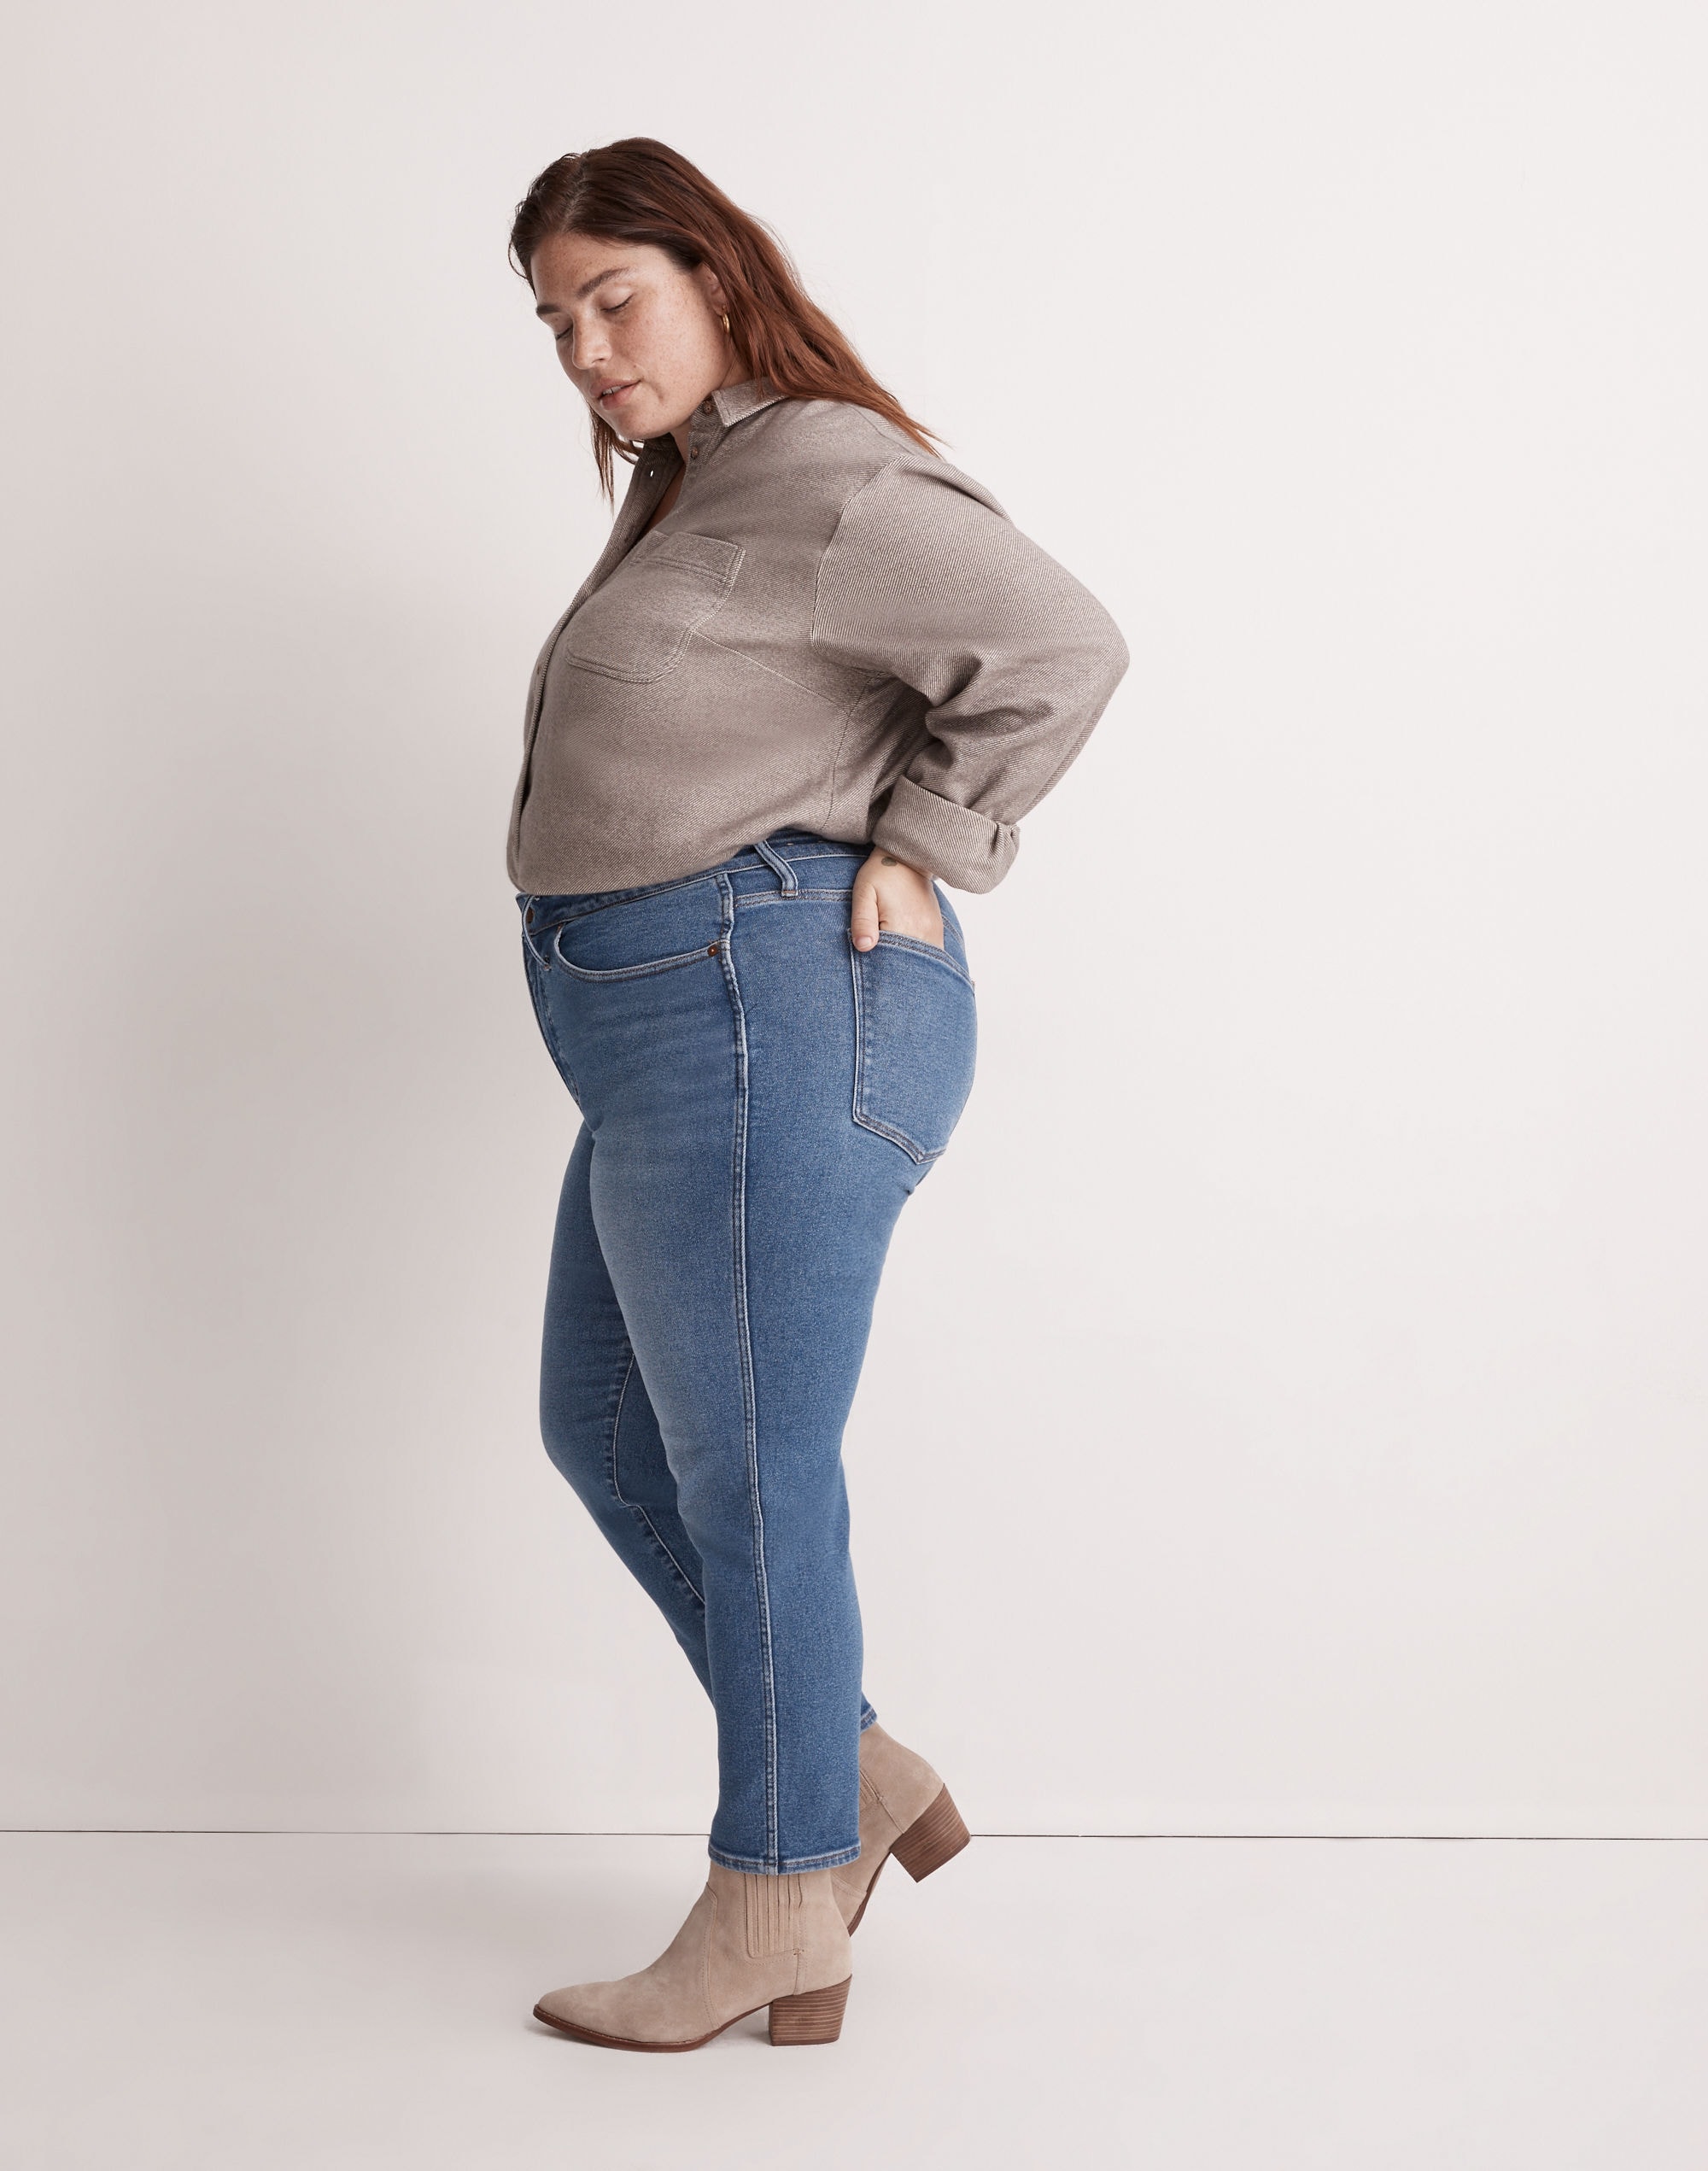 Plus Curvy Stovepipe Jeans in Leaside Wash